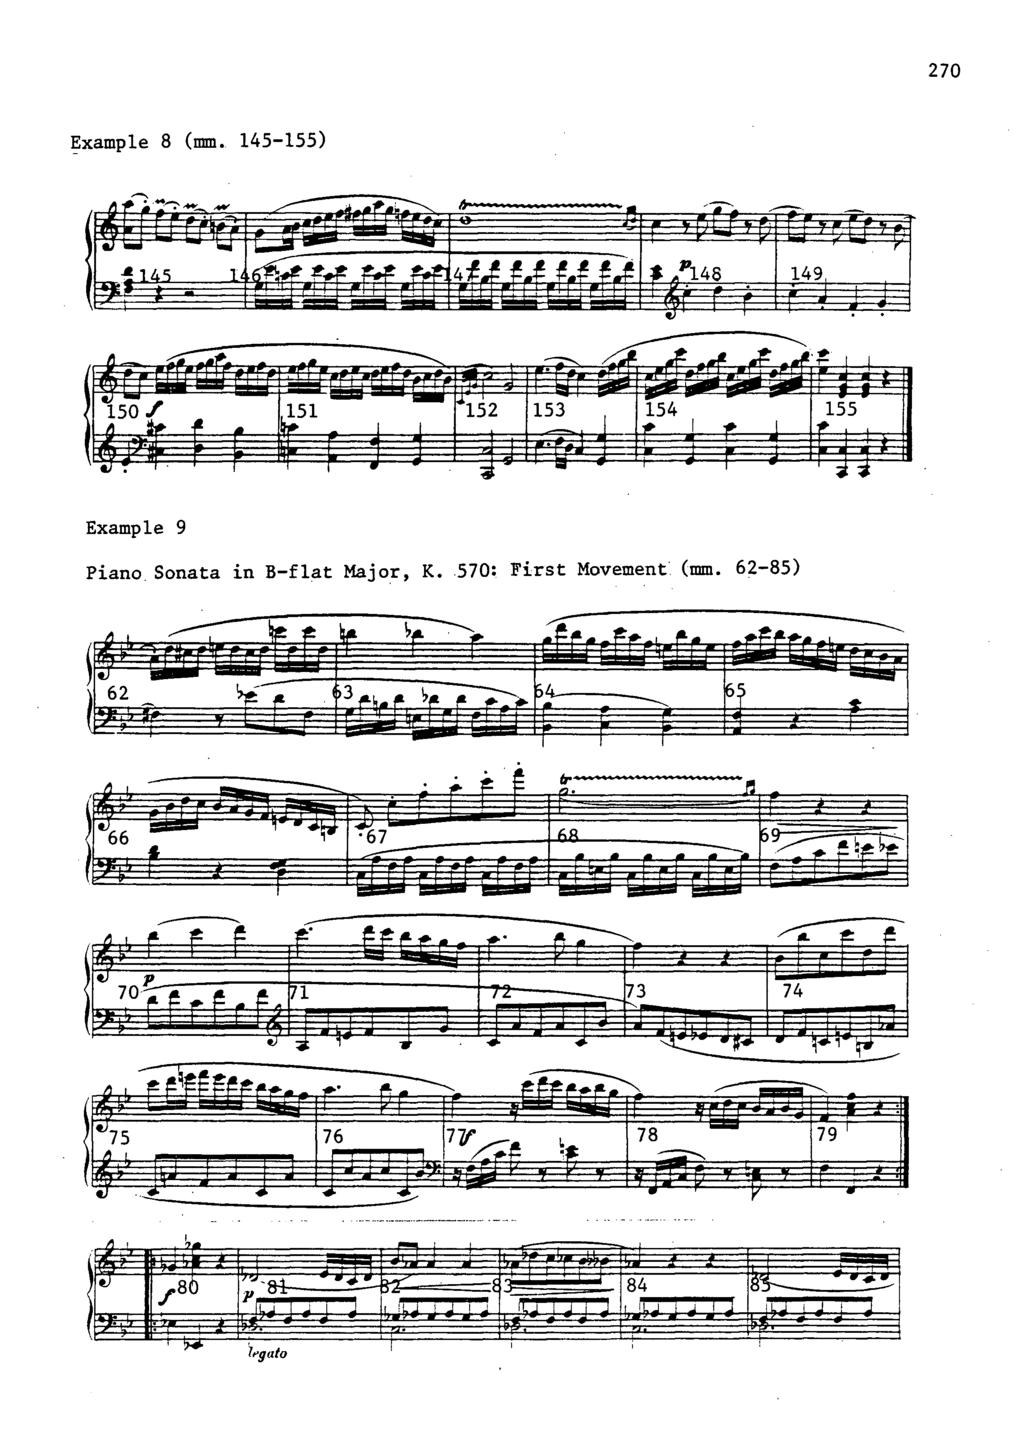 7 270 Example 8 (mm. 145-155) Example 9 Piano Sonata in B-flat Major, K. 570: First Movement (mm. 62-85) I* i 11 11 n 1!